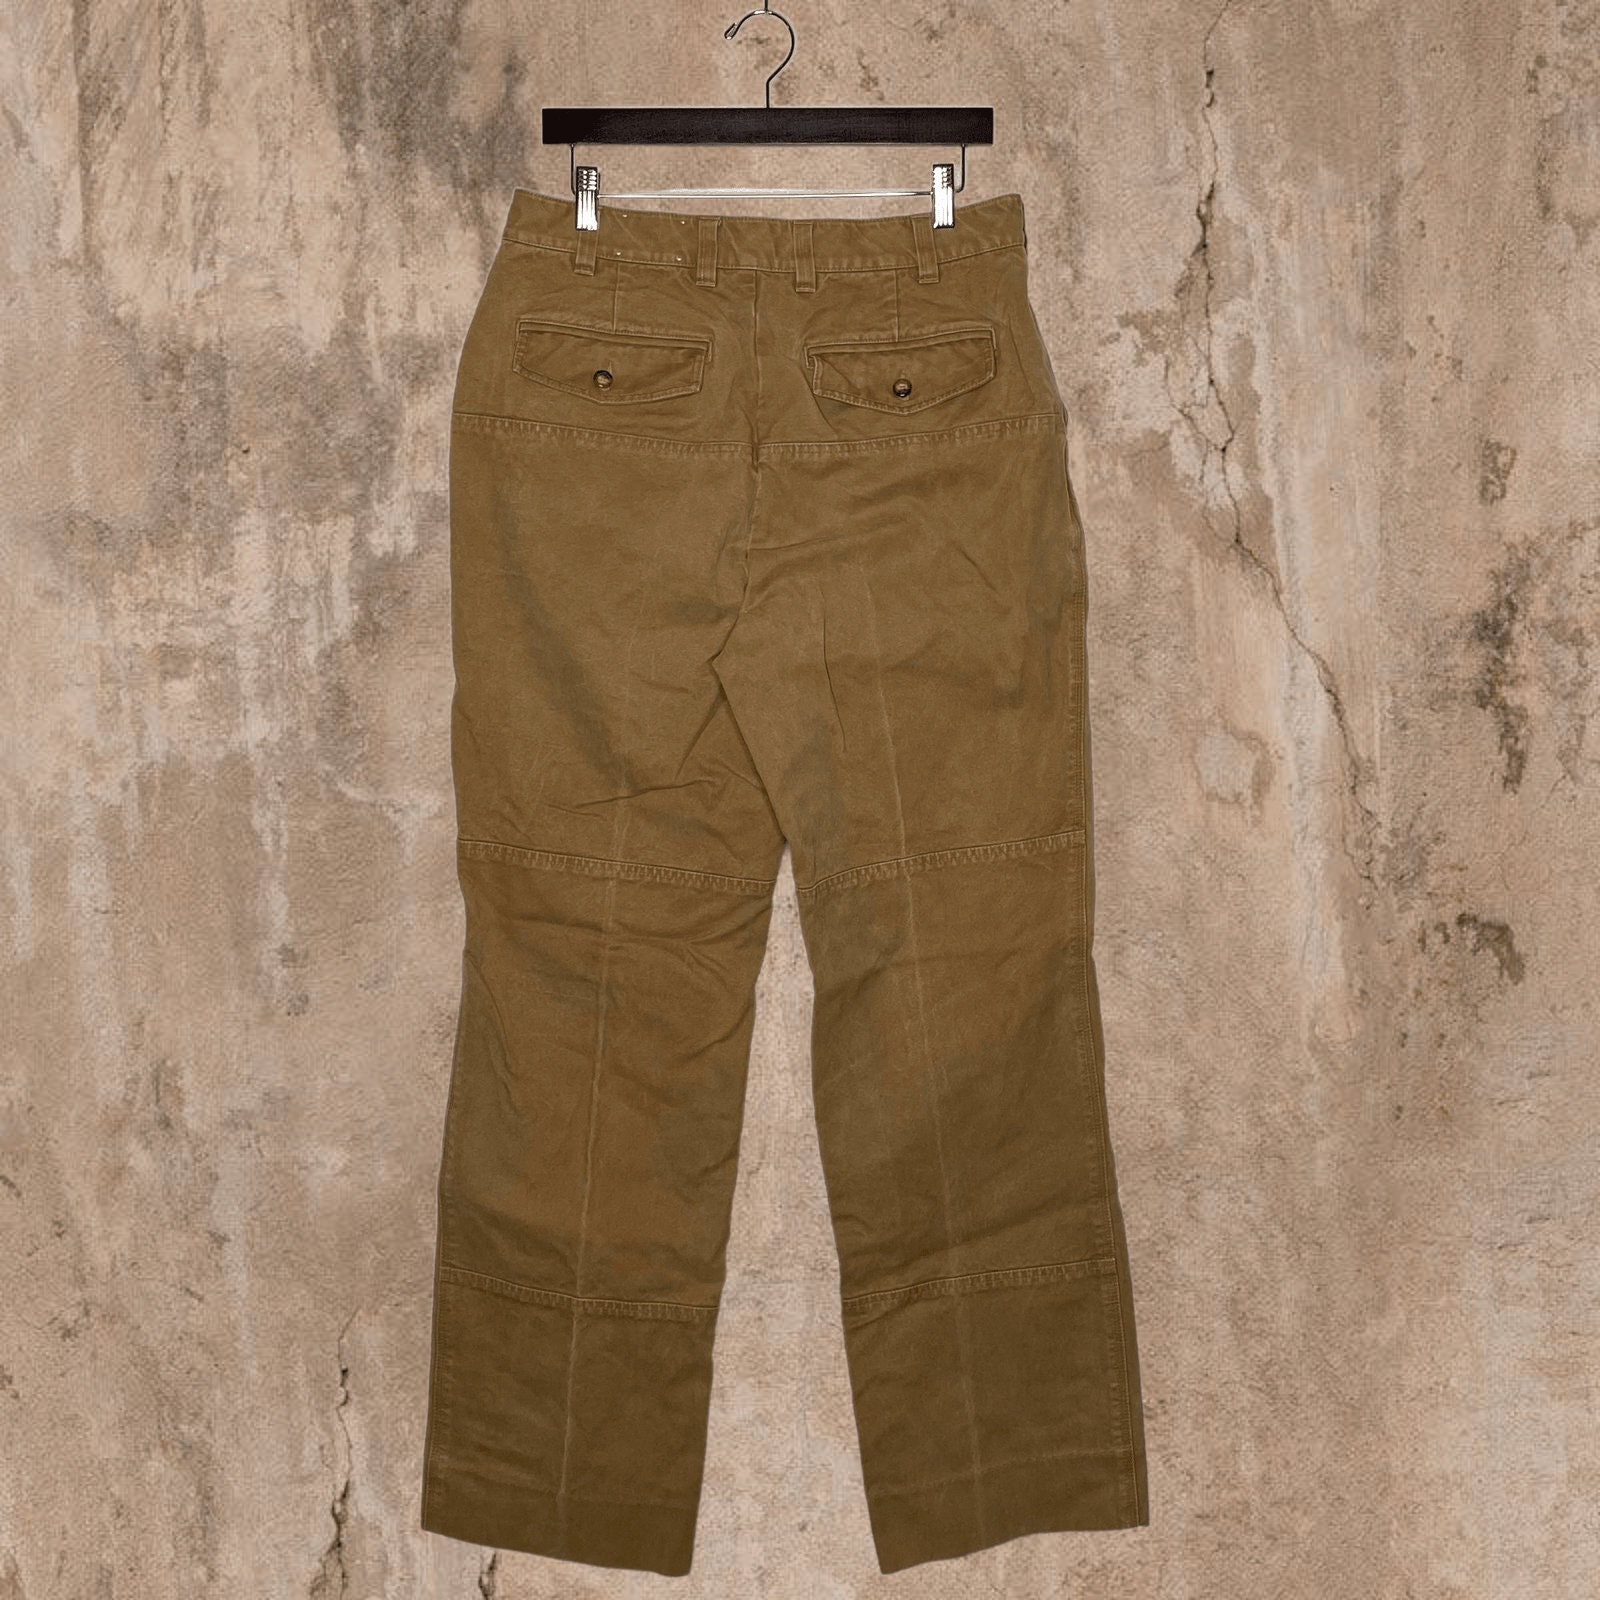 Vintage Orvis Double Knees Carpenter Pants Relaxed Fit Tan Thick Canvas ...